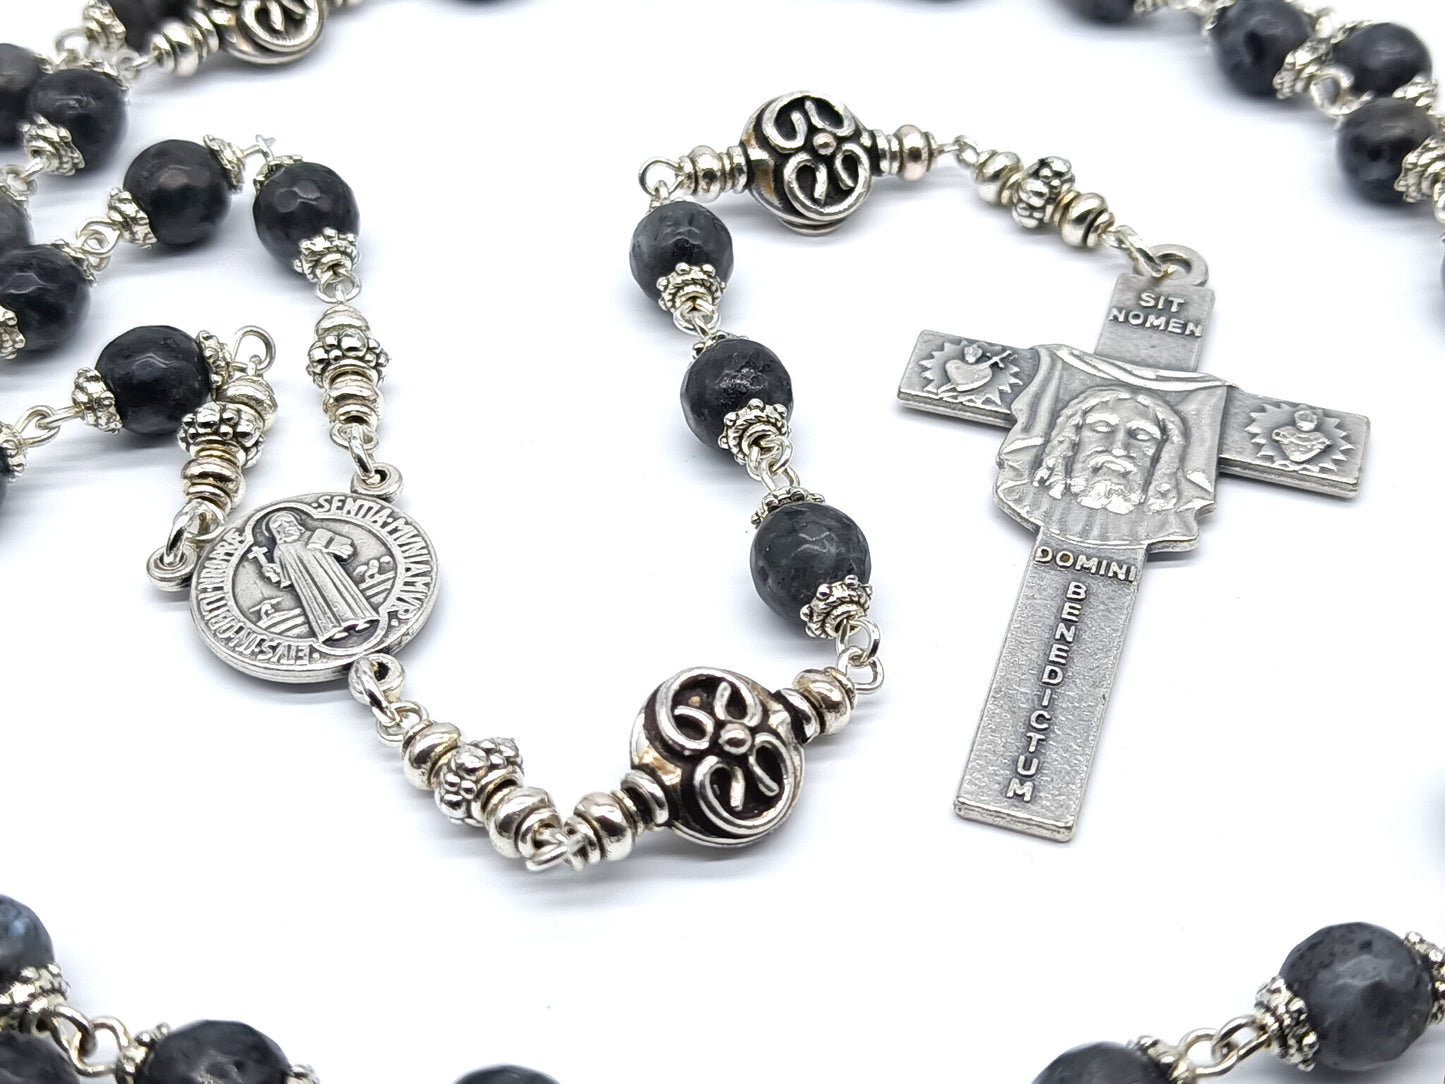 Holy Face of Jesus unique rosary beads with Norwegian Laverkite gemstone beads, Holy face crucifix, silver pater beads and St Benedict centre medal.